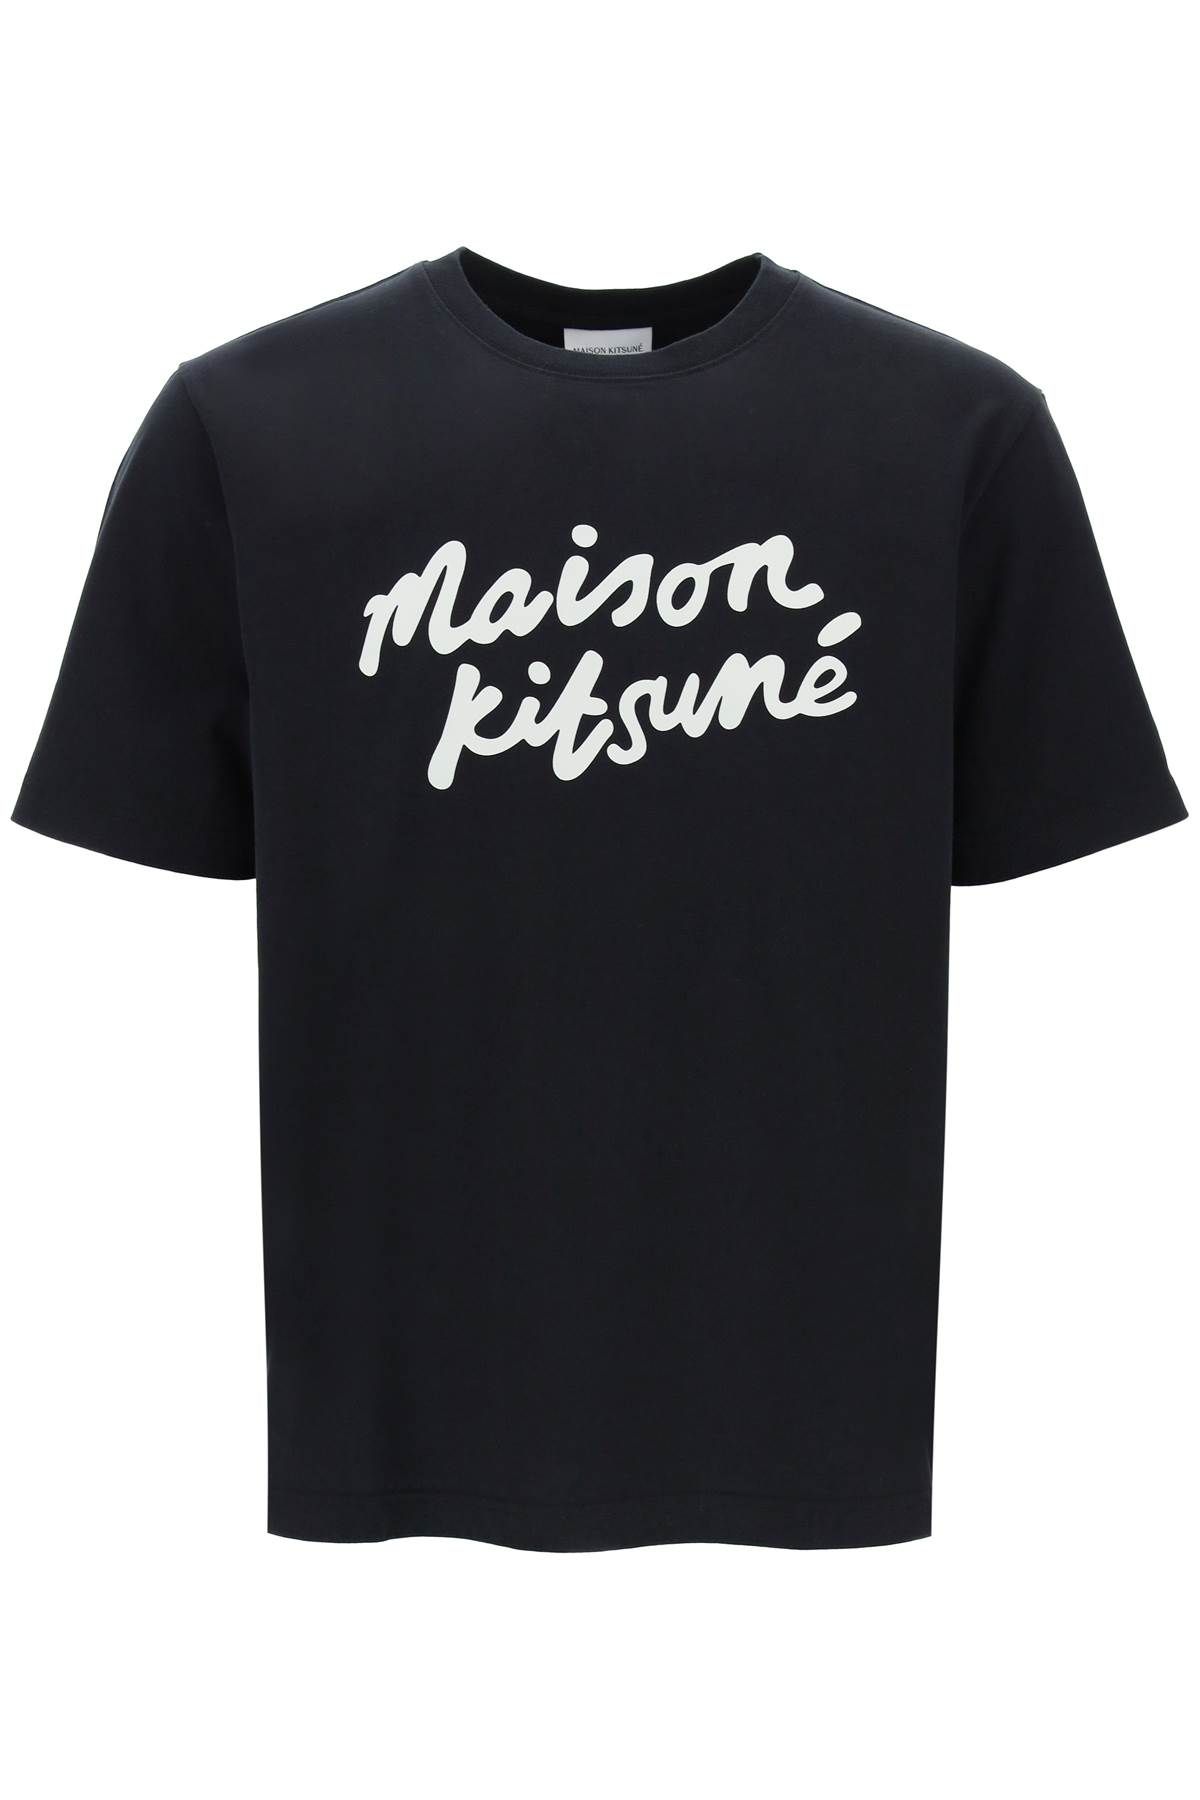 Maison Kitsuné T-shirt With Logo In Handwriting In Black